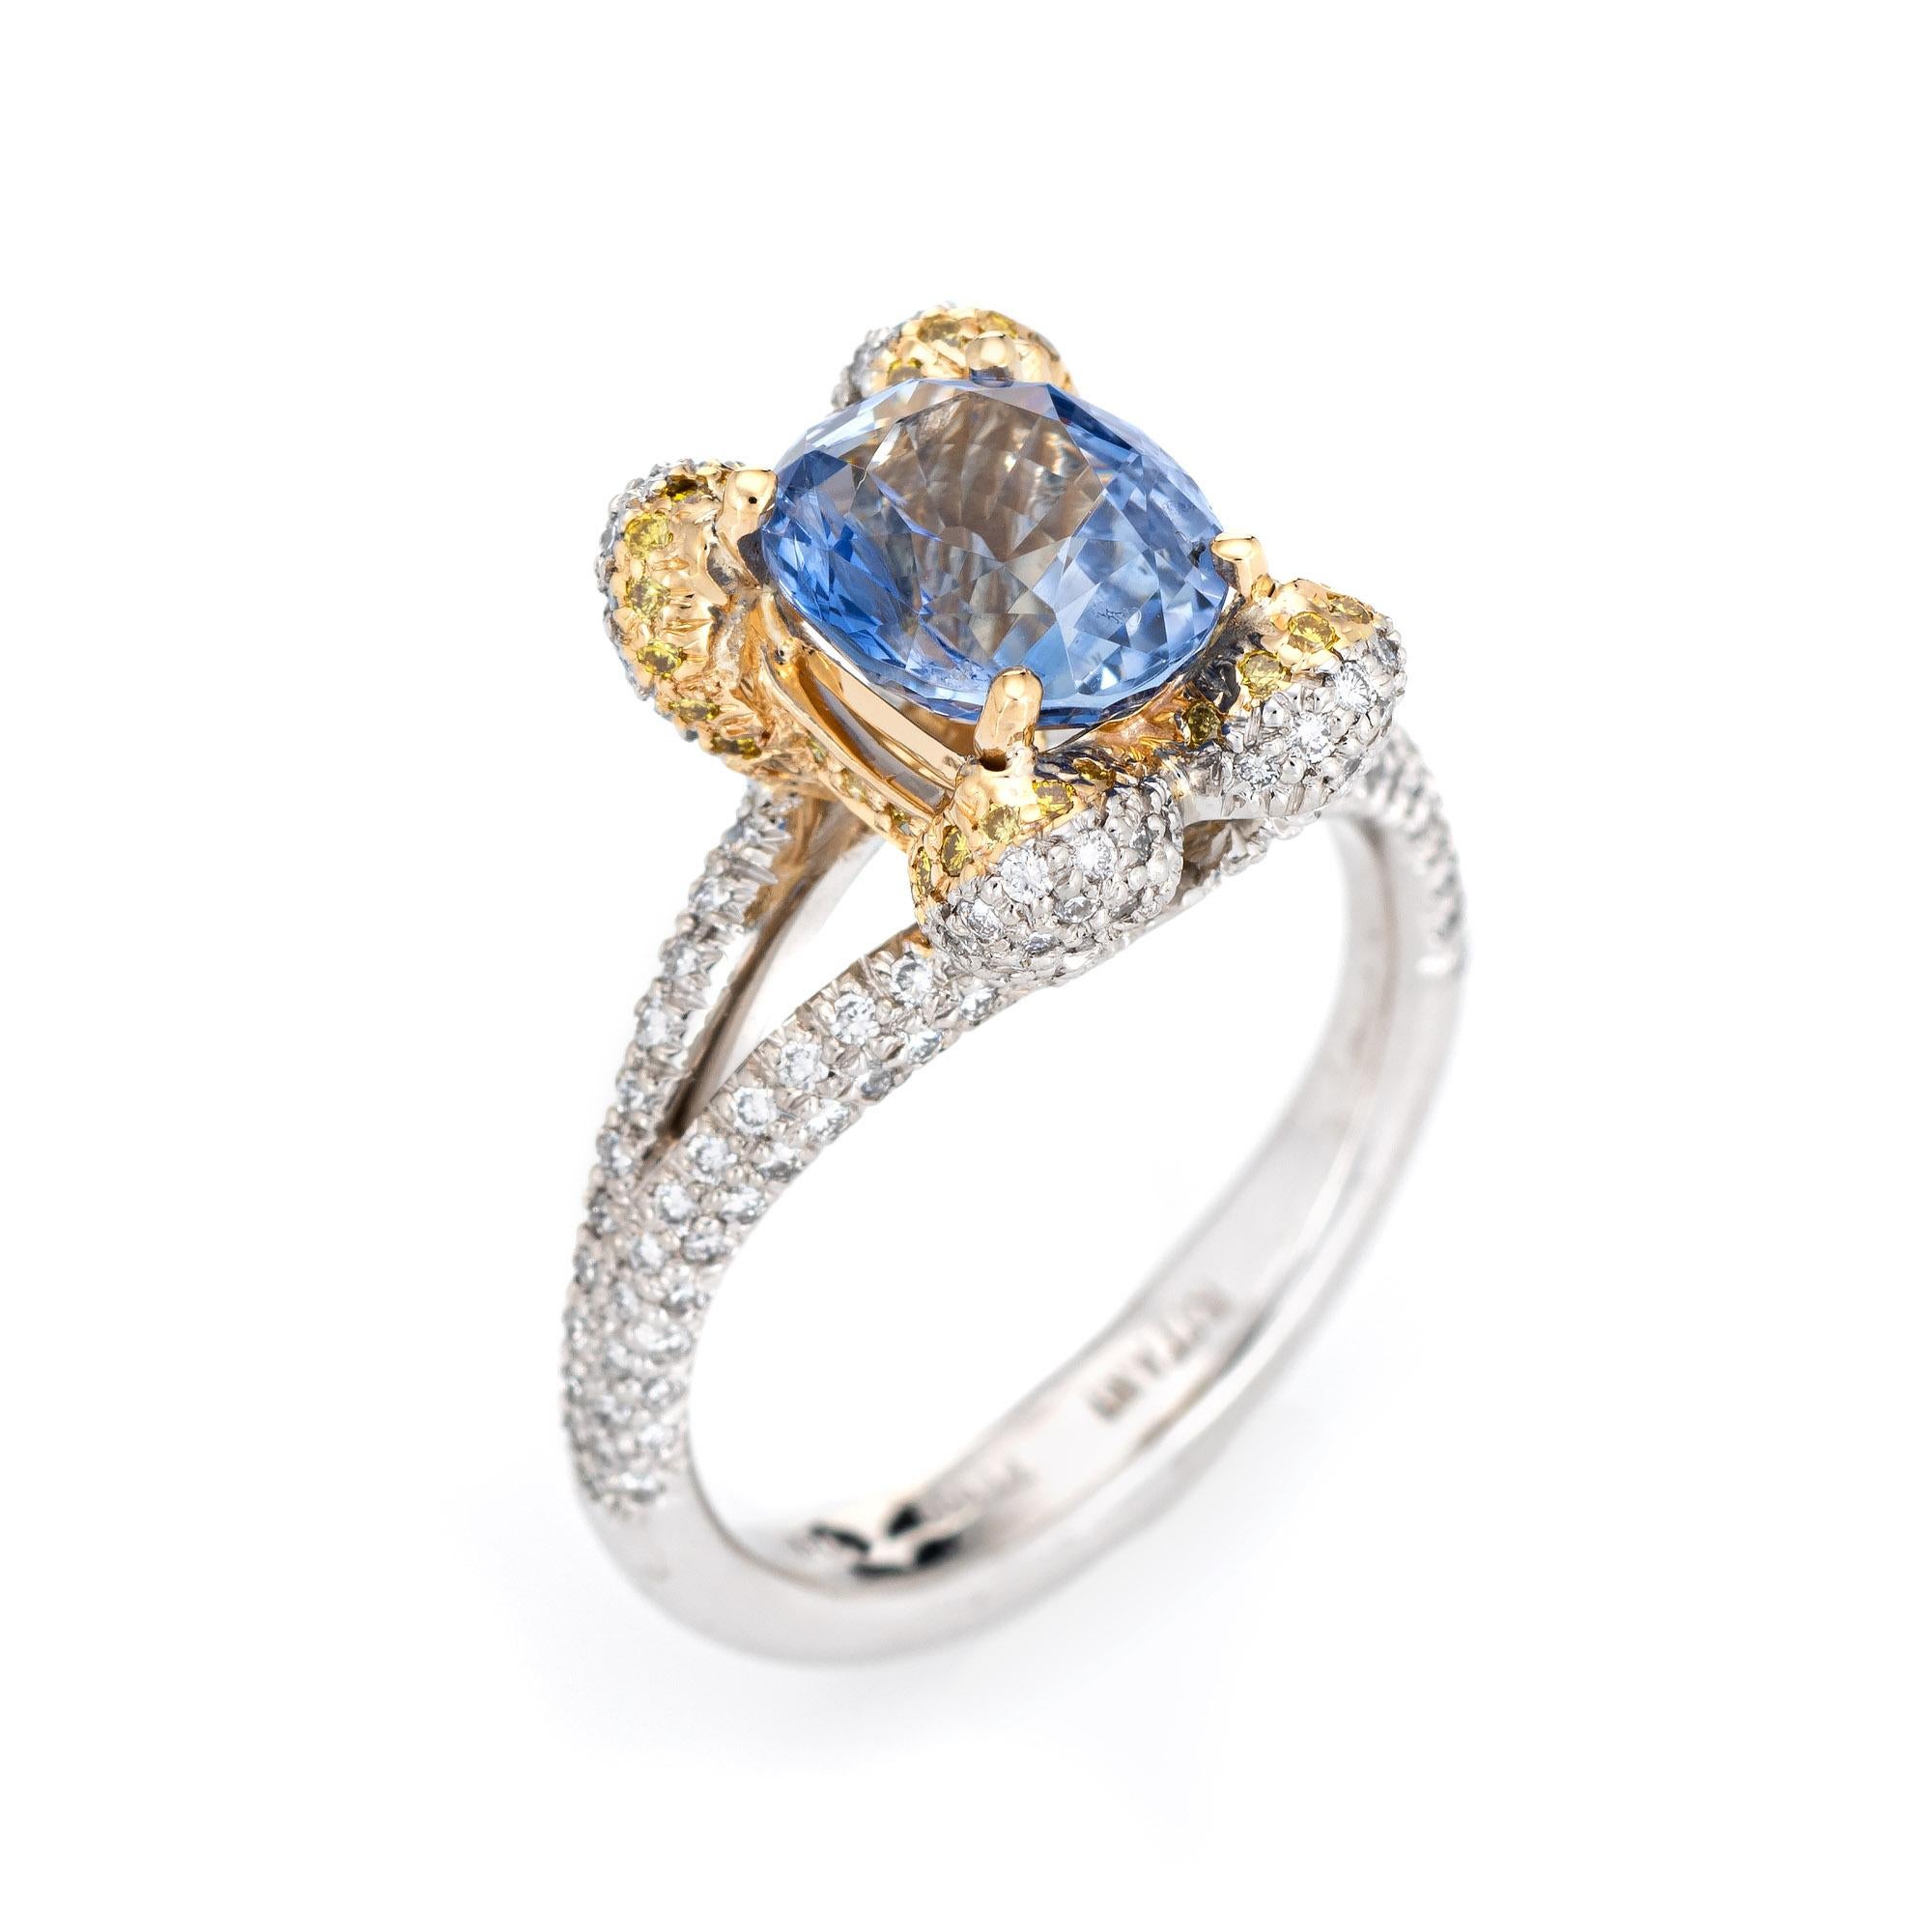 Stylish pre-owned Ritani natural cornflower blue sapphire & diamond gemstone engagement ring crafted in 18 karat yellow gold and platinum. 

Oval faceted cornflower blue sapphire is estimated at 3.26 carats, accented with an estimated 0.75 carats of